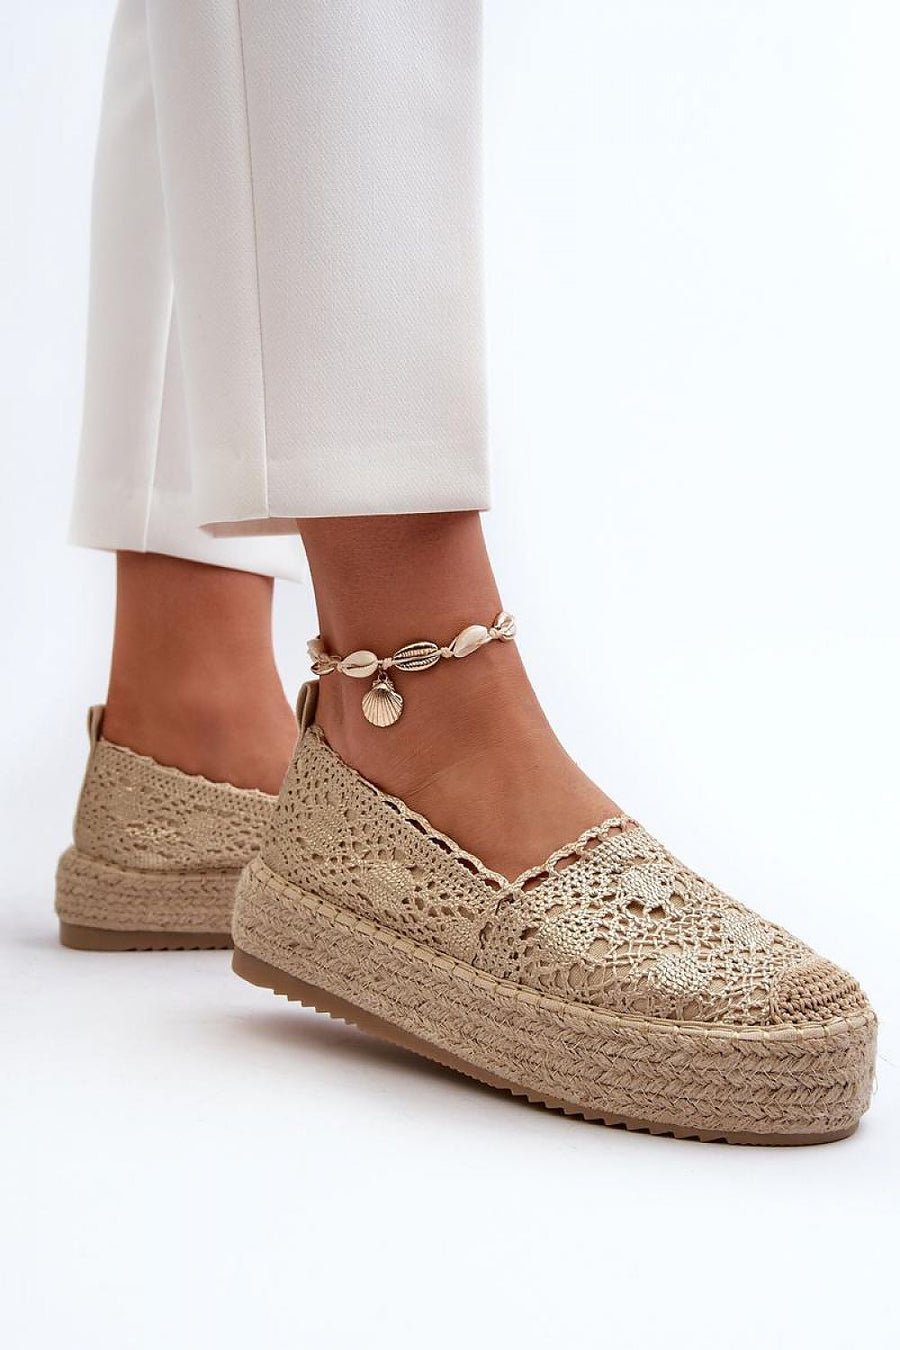 Espadrilles Model 197139 Step in style